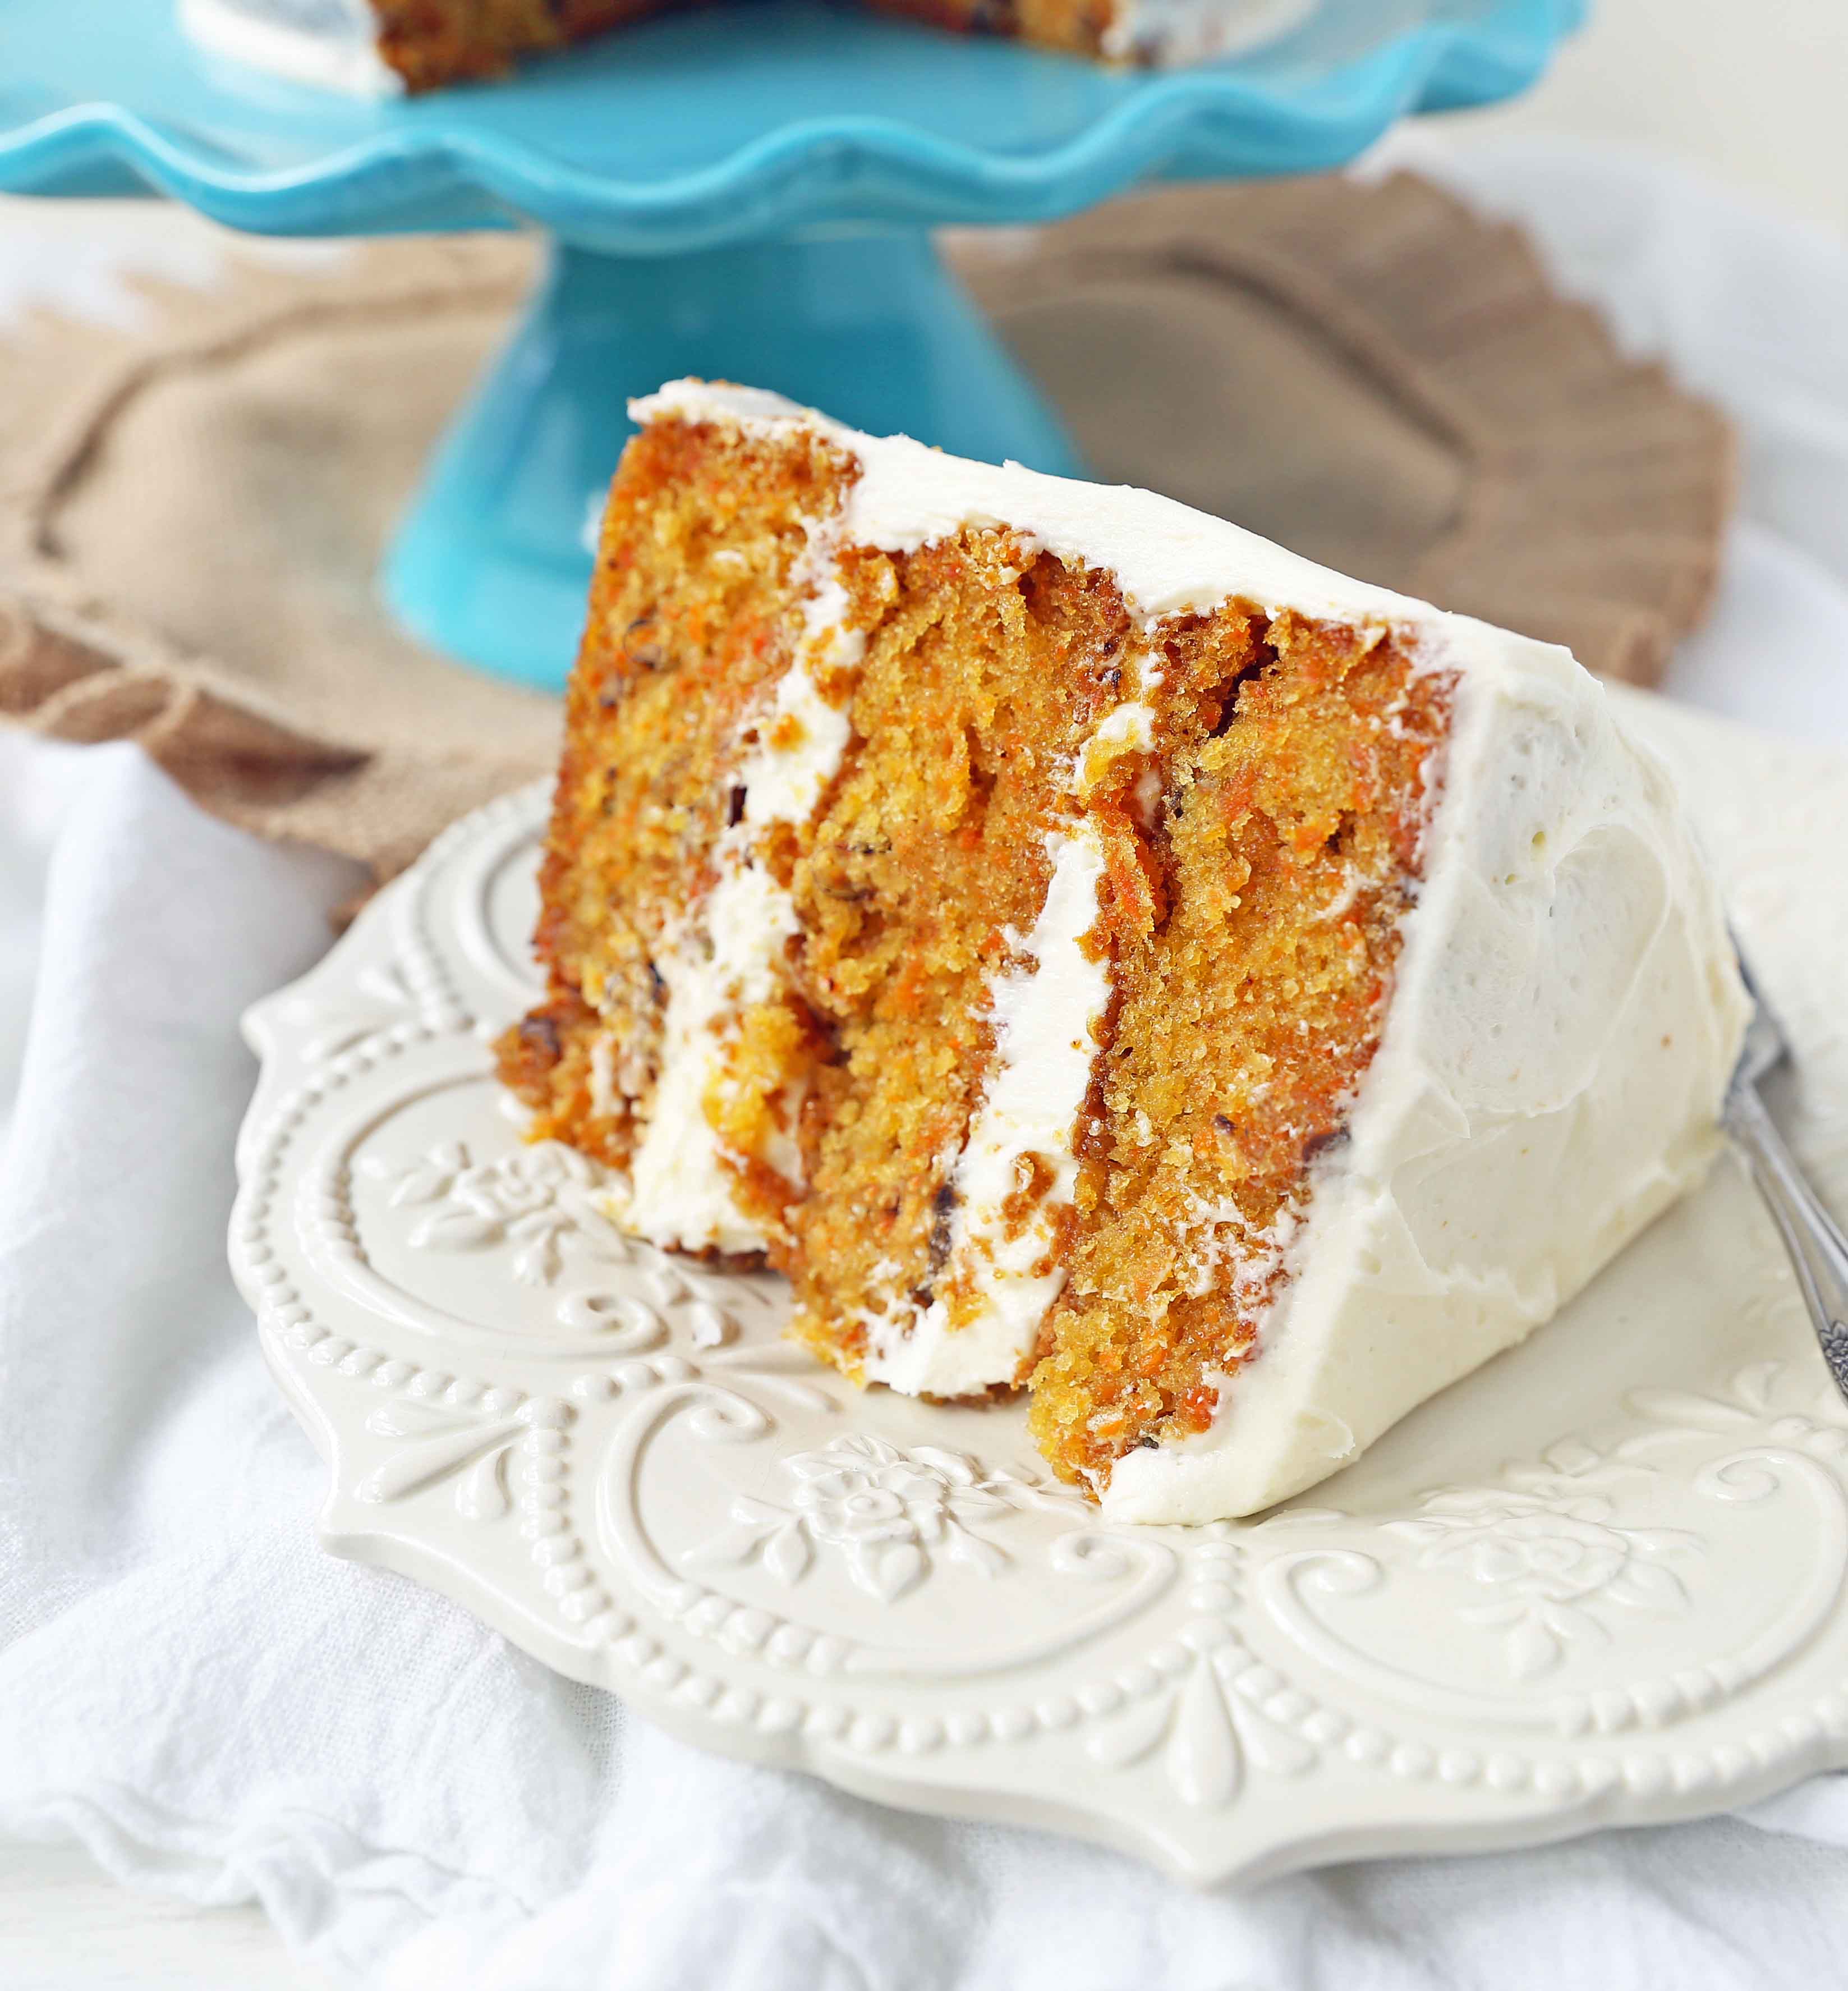 The Best Carrot Cake Recipe. A moist, tender carrot cake covered in a sweet cream cheese frosting. The perfect carrot cake recipe! #carrotcake #carrotcakerecipe #easter #easterrecipes